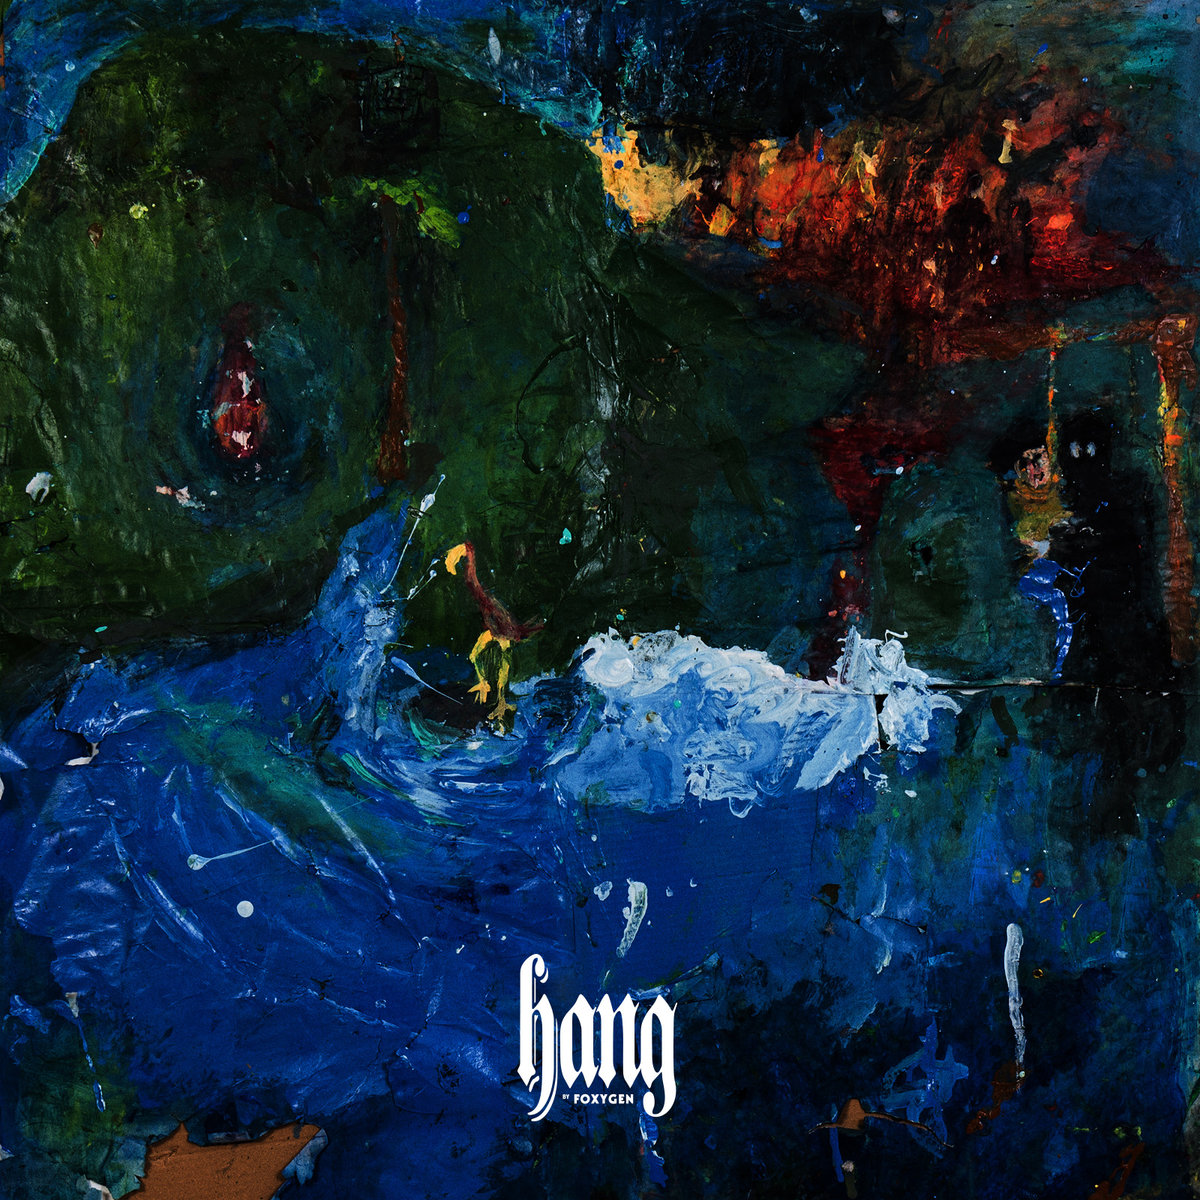 'Hang' by Foxygen, album review by Calle Hitchcock. The full-length comes out January 20th via Jagjaguwar.